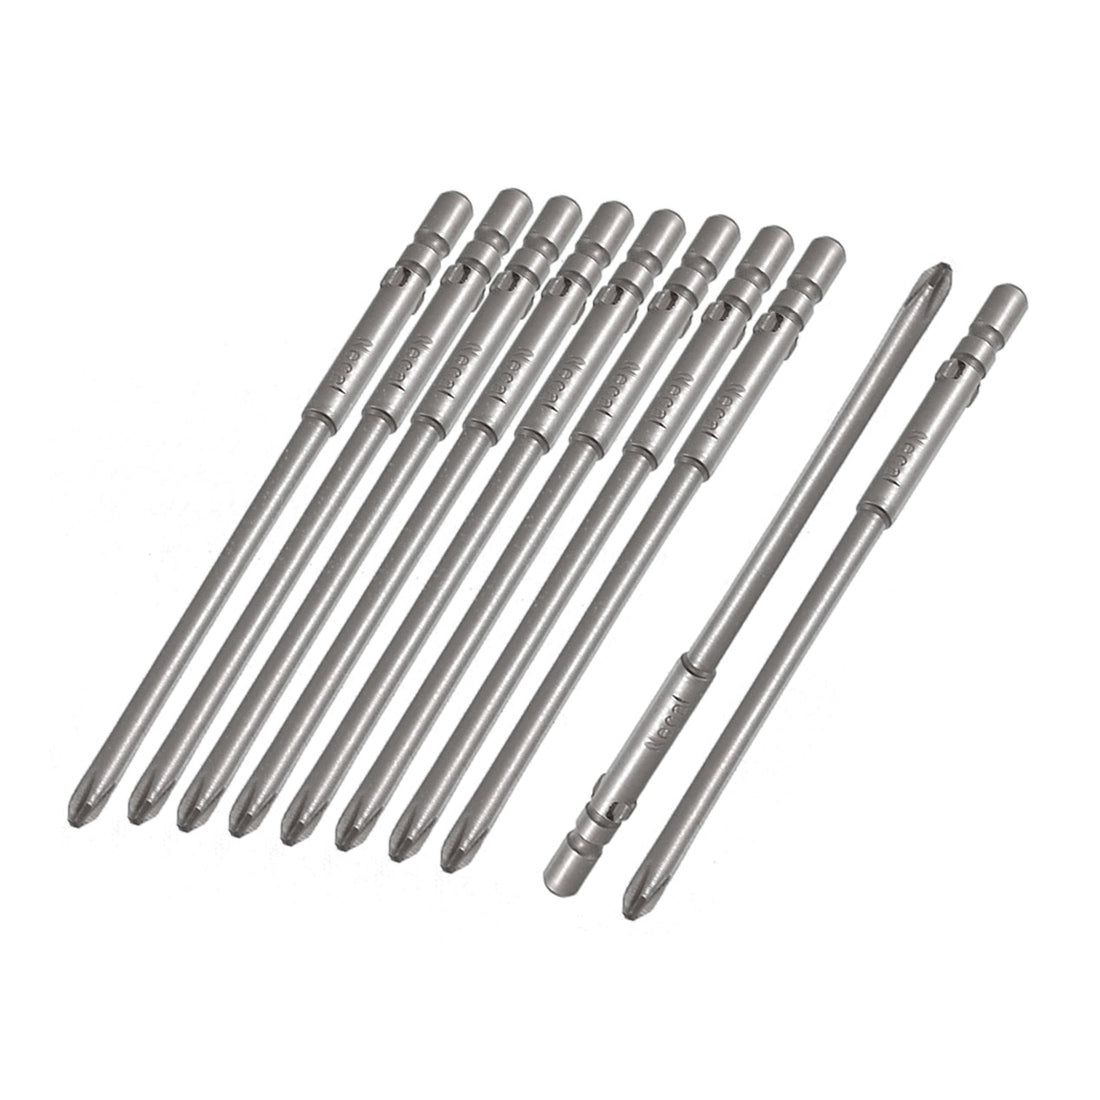 uxcell Uxcell 10 Pcs 4mm Shank 80mm Length 3mm Phillips PH1 Magnetic Screwdriver Bits